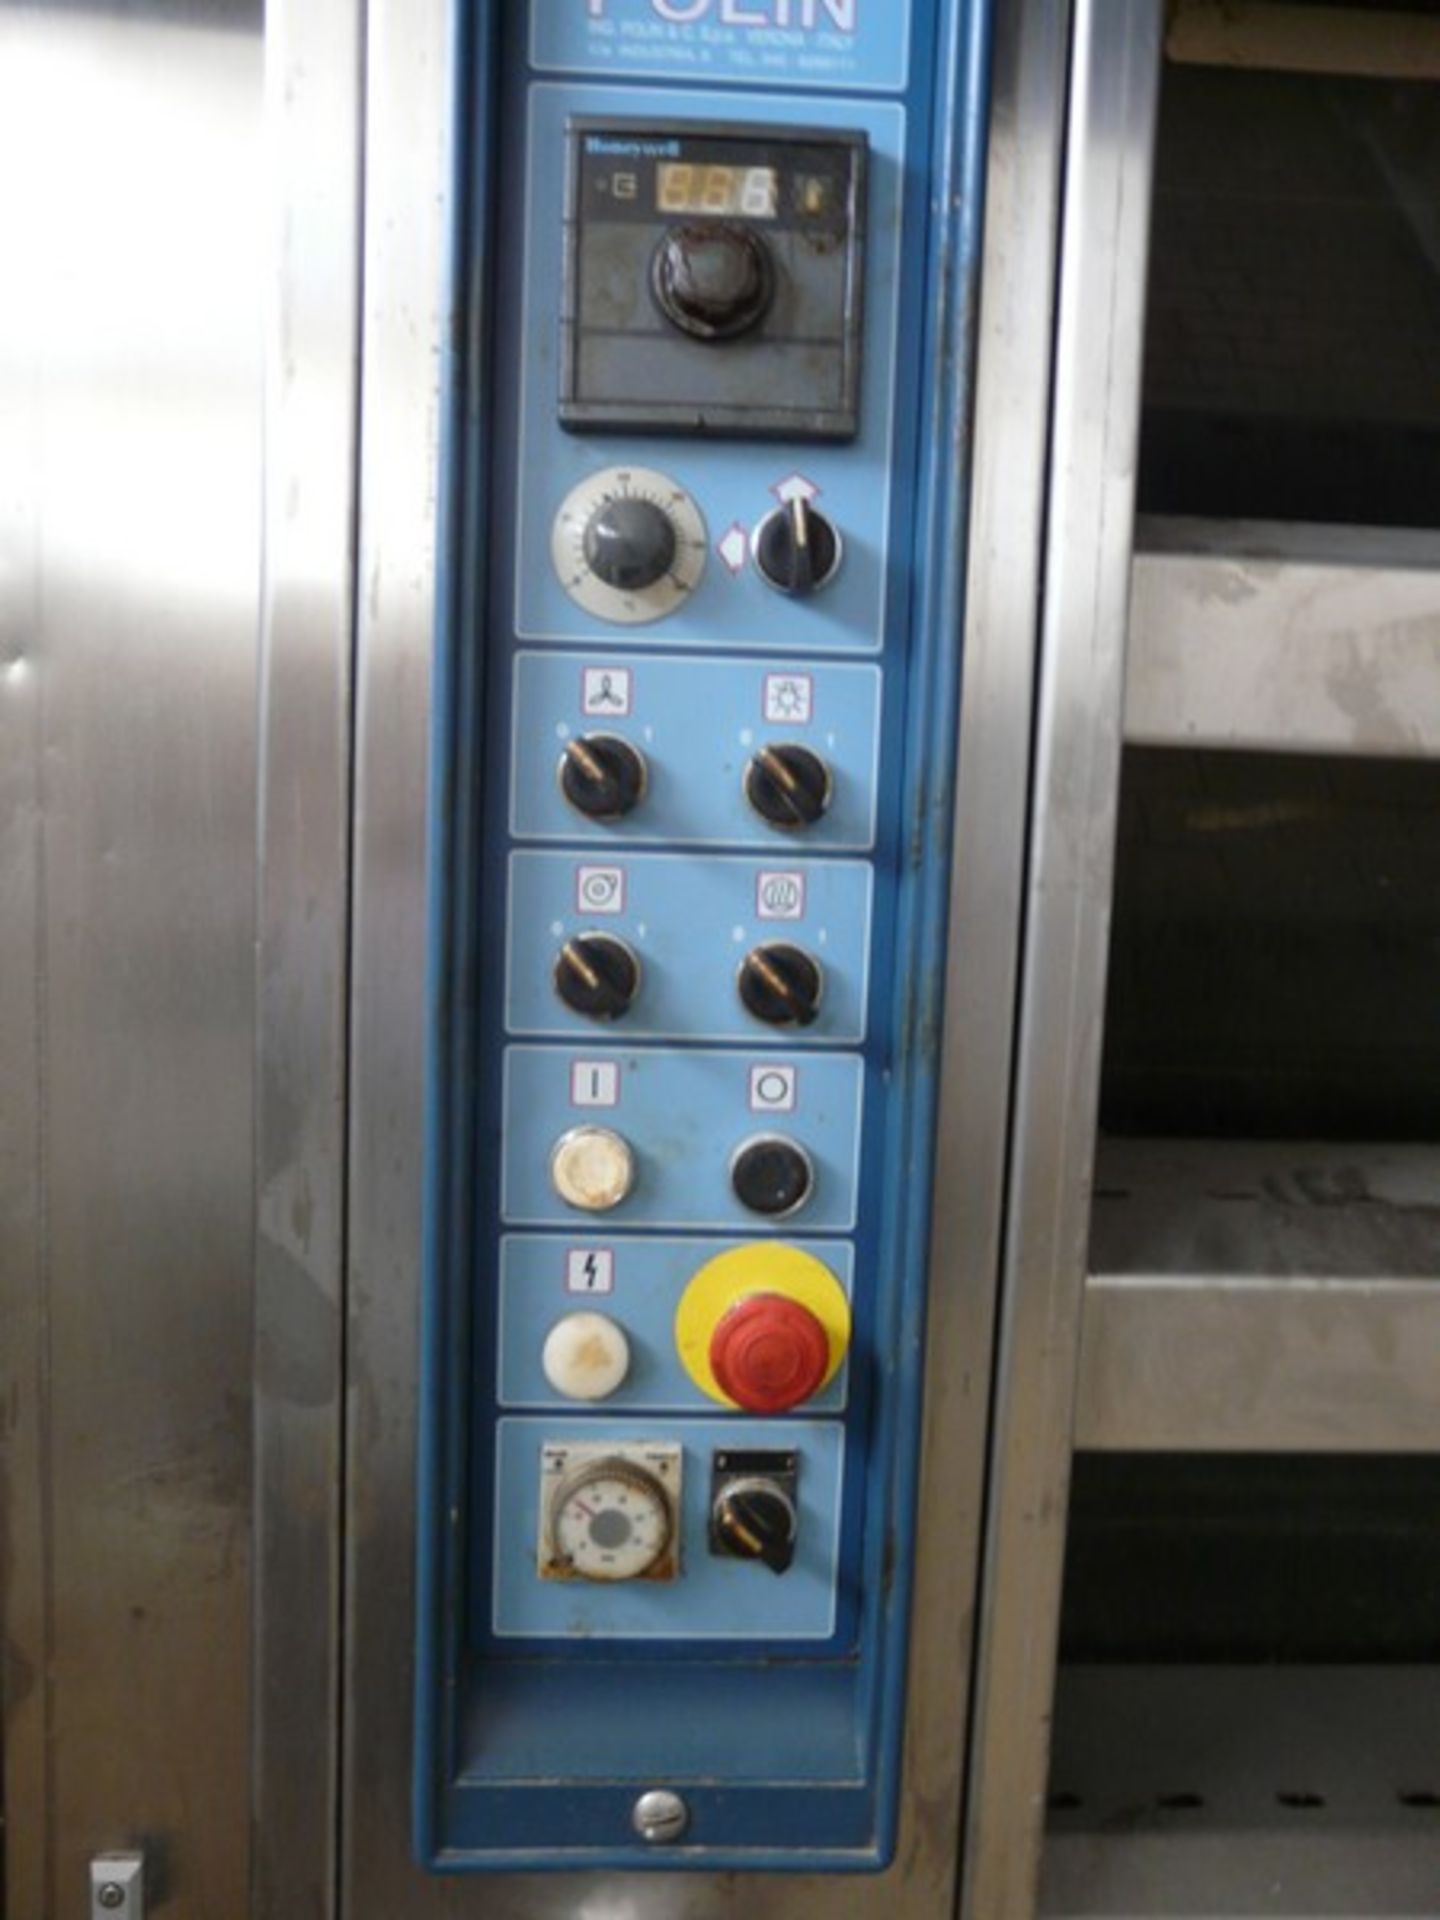 English: POLIN Oven With 10 Stations, Humidity, Gas Burner, Y.O.M.: 2003, Construction Stainless - Bild 4 aus 12